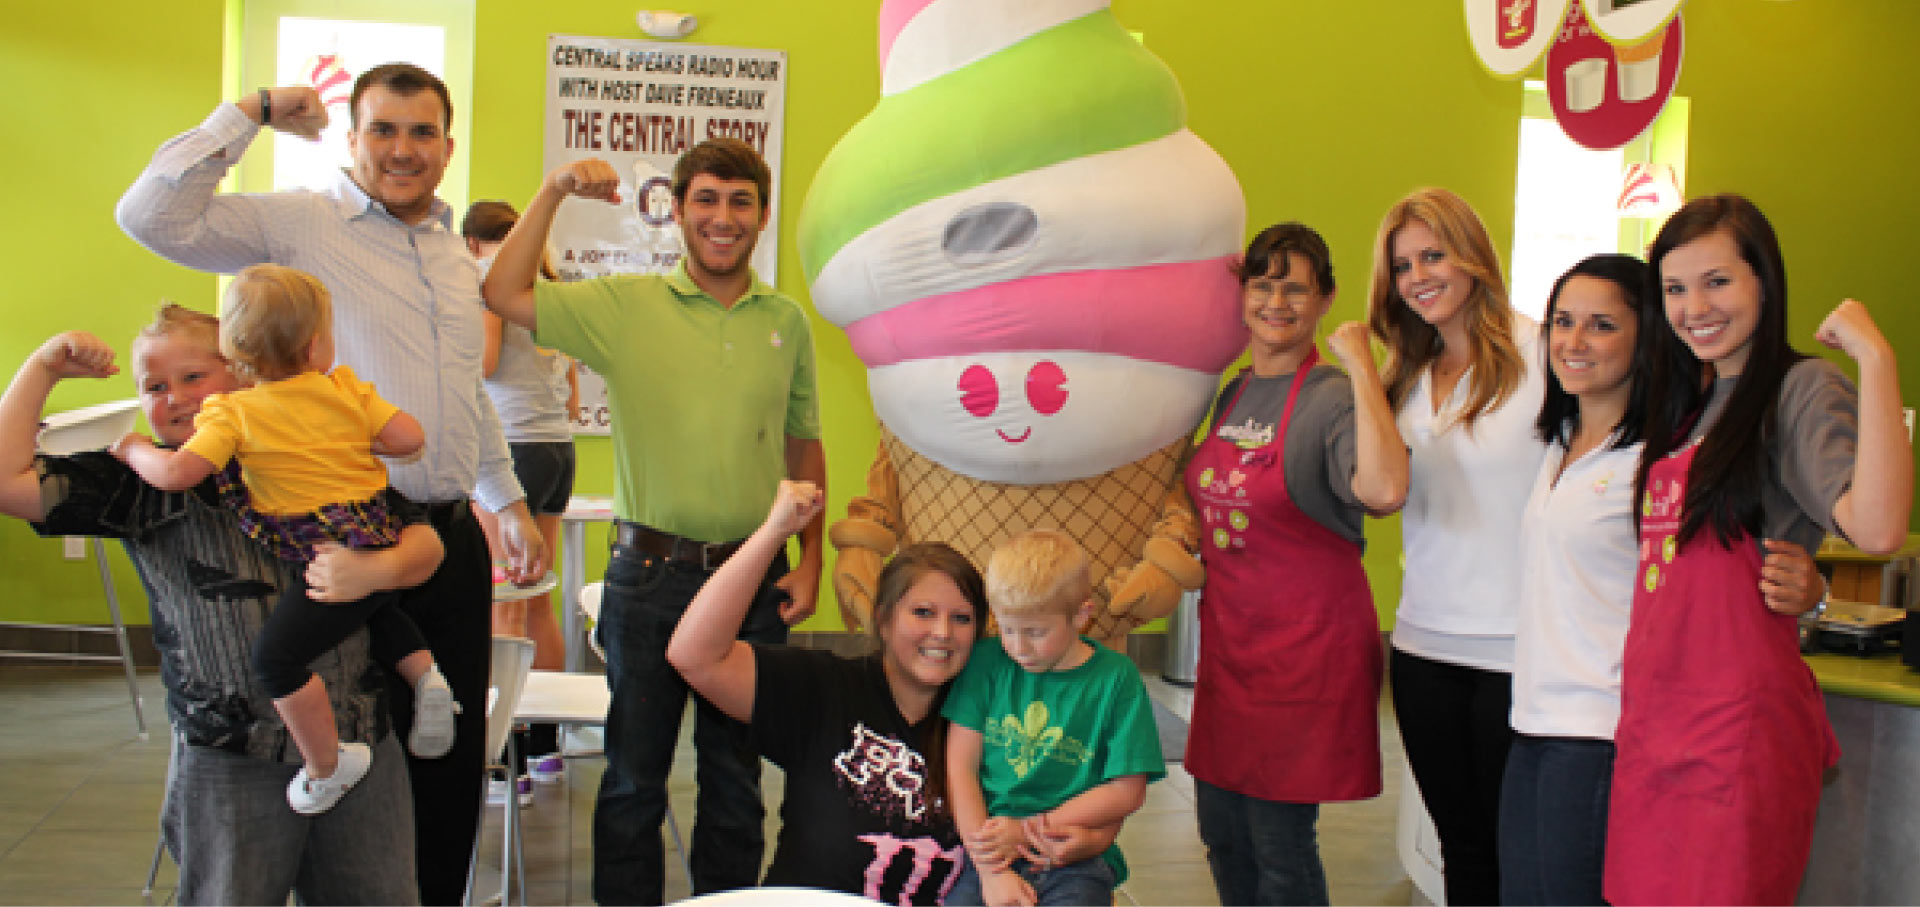 Menchie's team members posing with customers inside a store